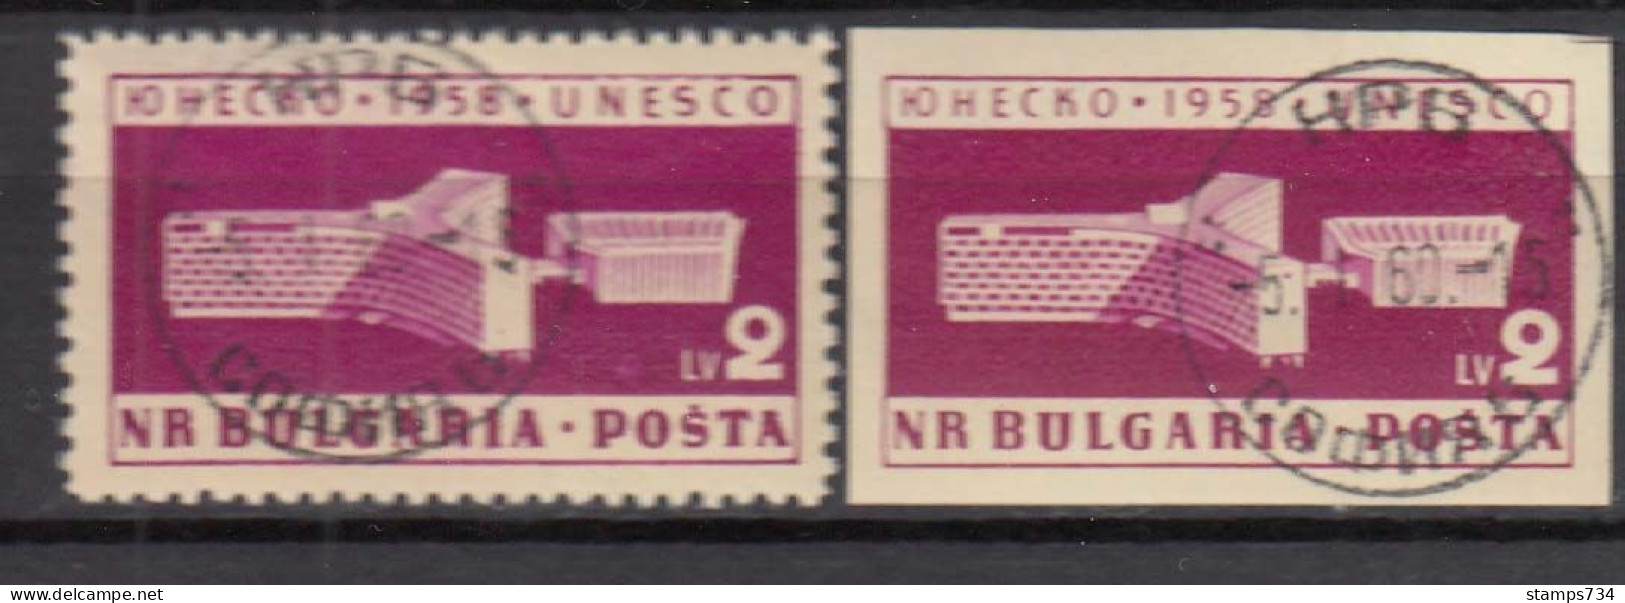 Bulgaria 1959 - UNESCO, Mi-Nr. 1103 A+B, Used - Used Stamps